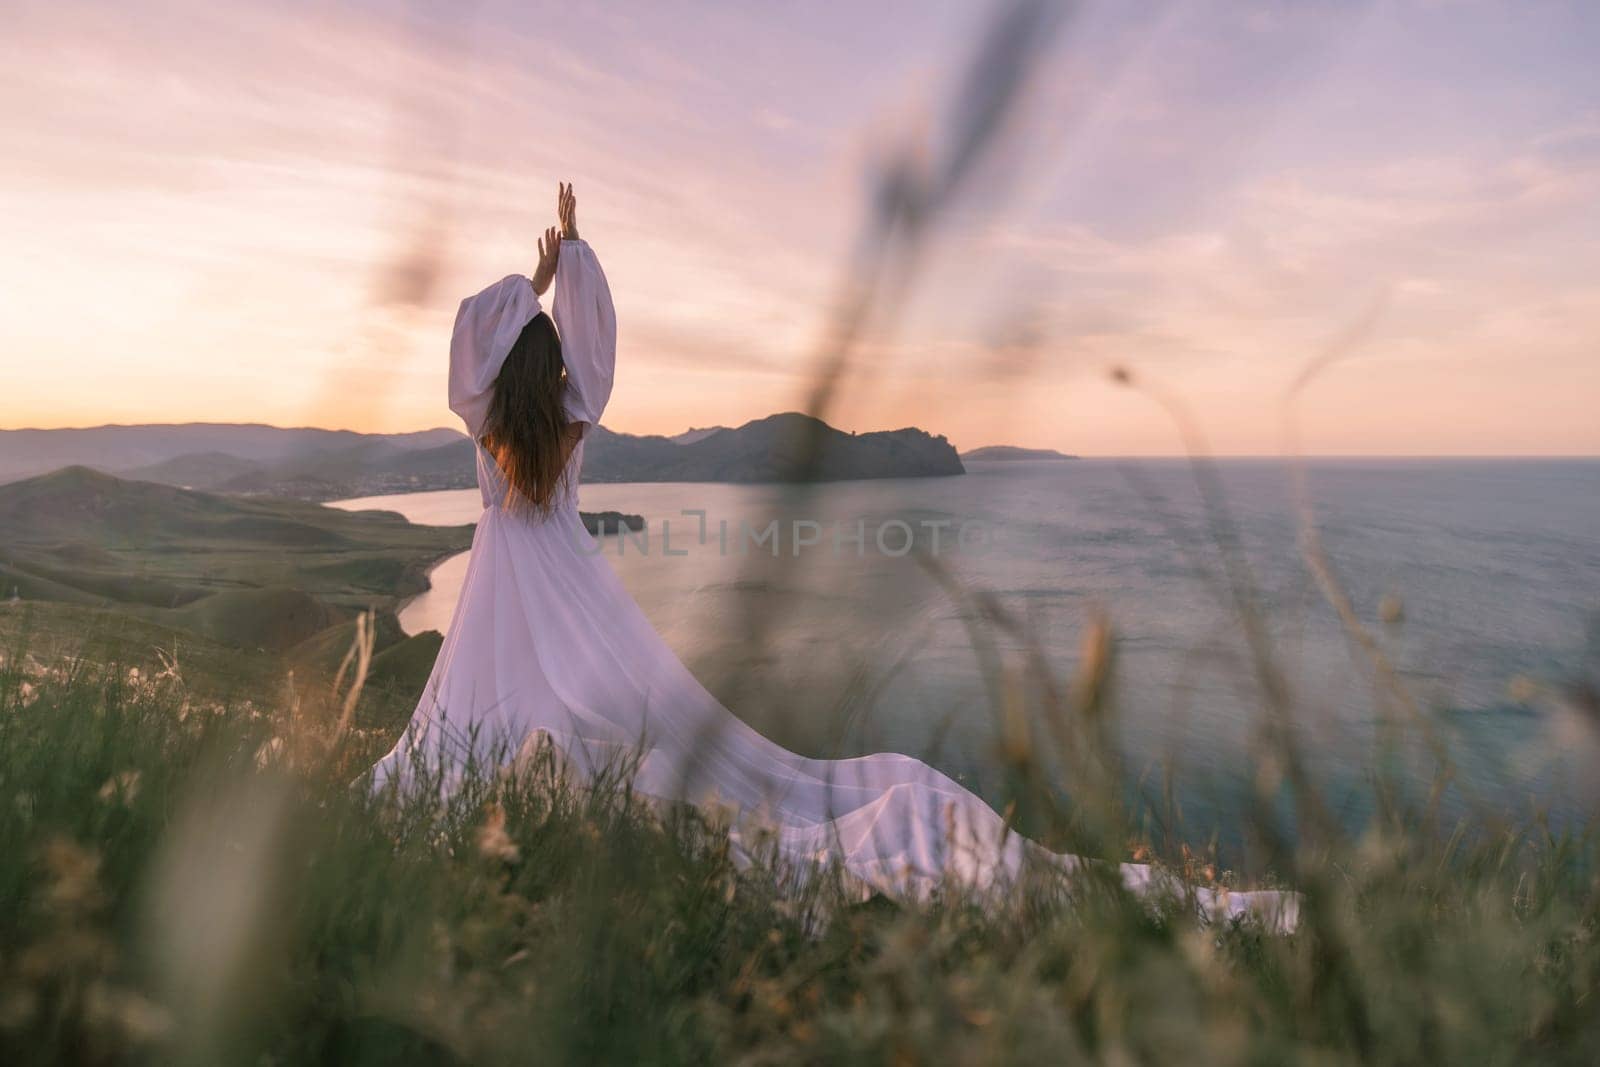 A woman in a white dress is standing on a grassy hill overlooking the ocean. She is in a yoga pose, with her arms raised above her head. The scene is serene and peaceful, with the ocean as a backdrop